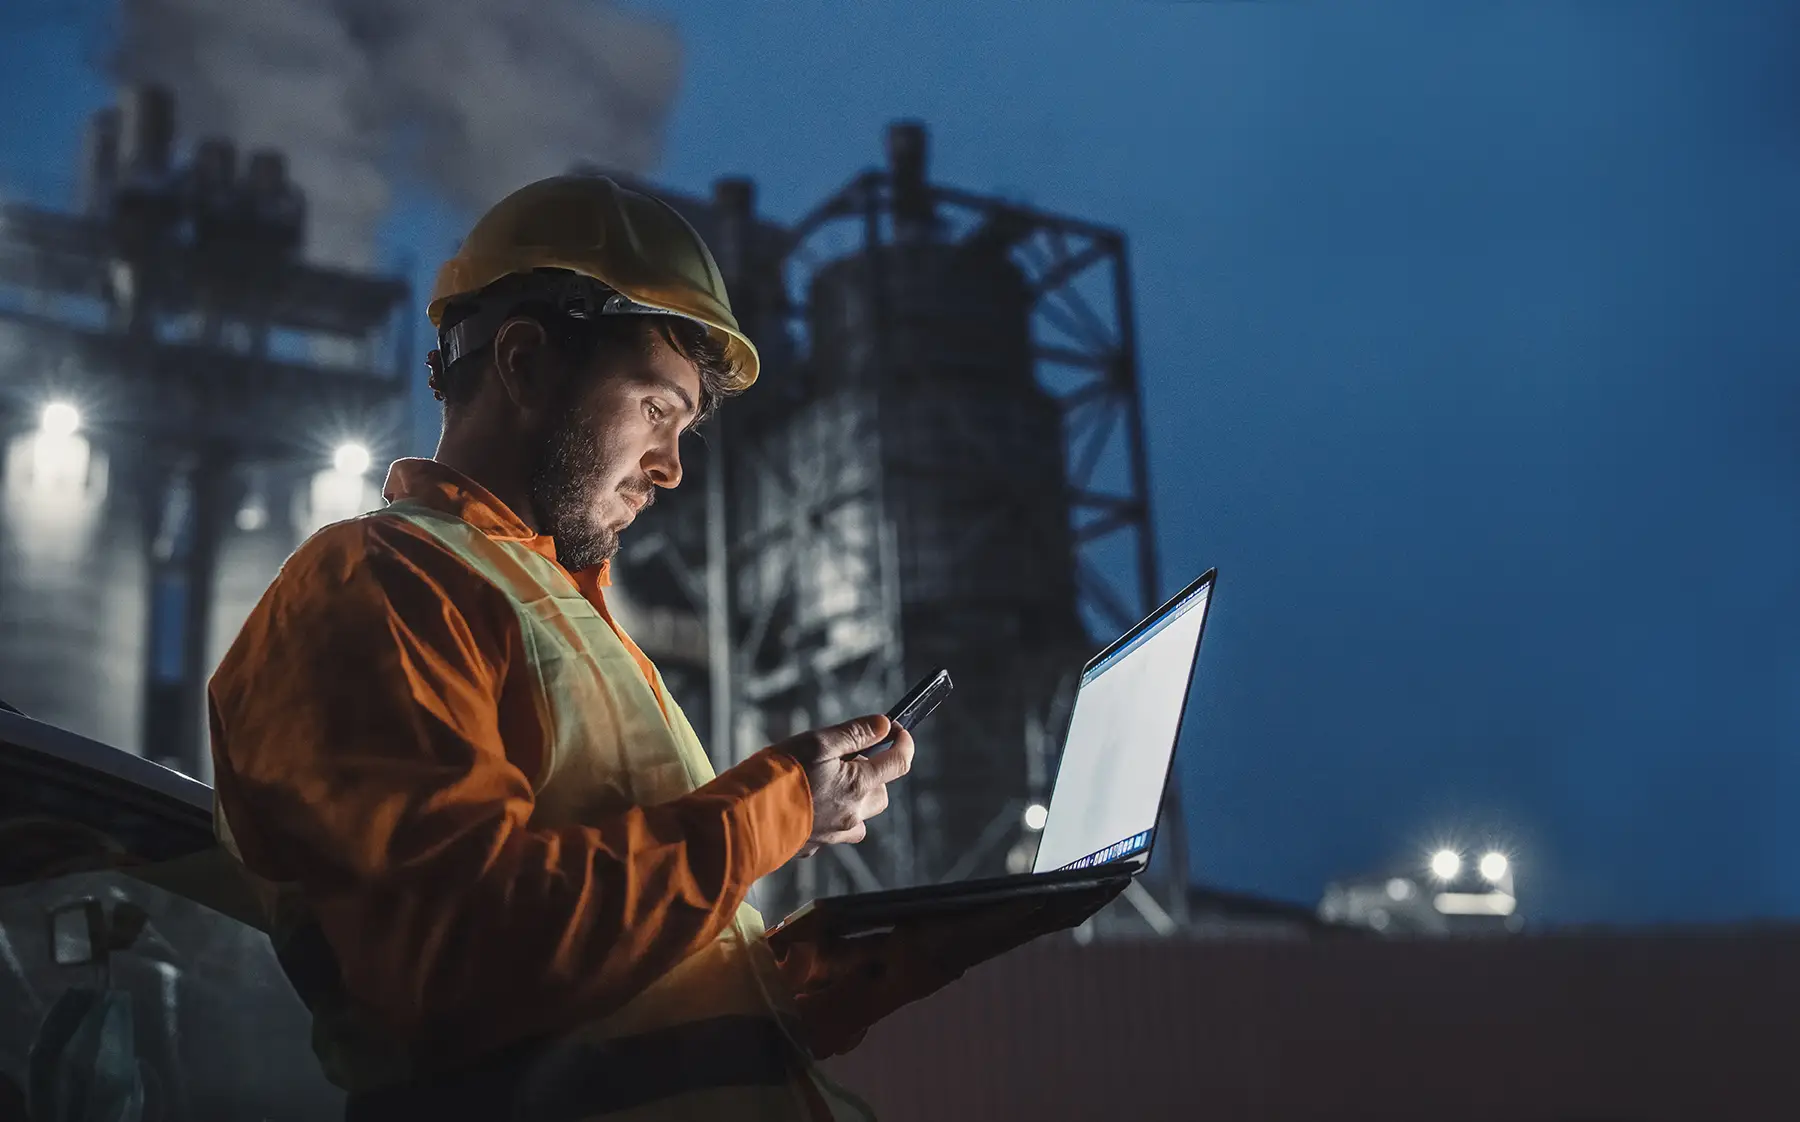 Oil and gas worker looking at computer and phone screen